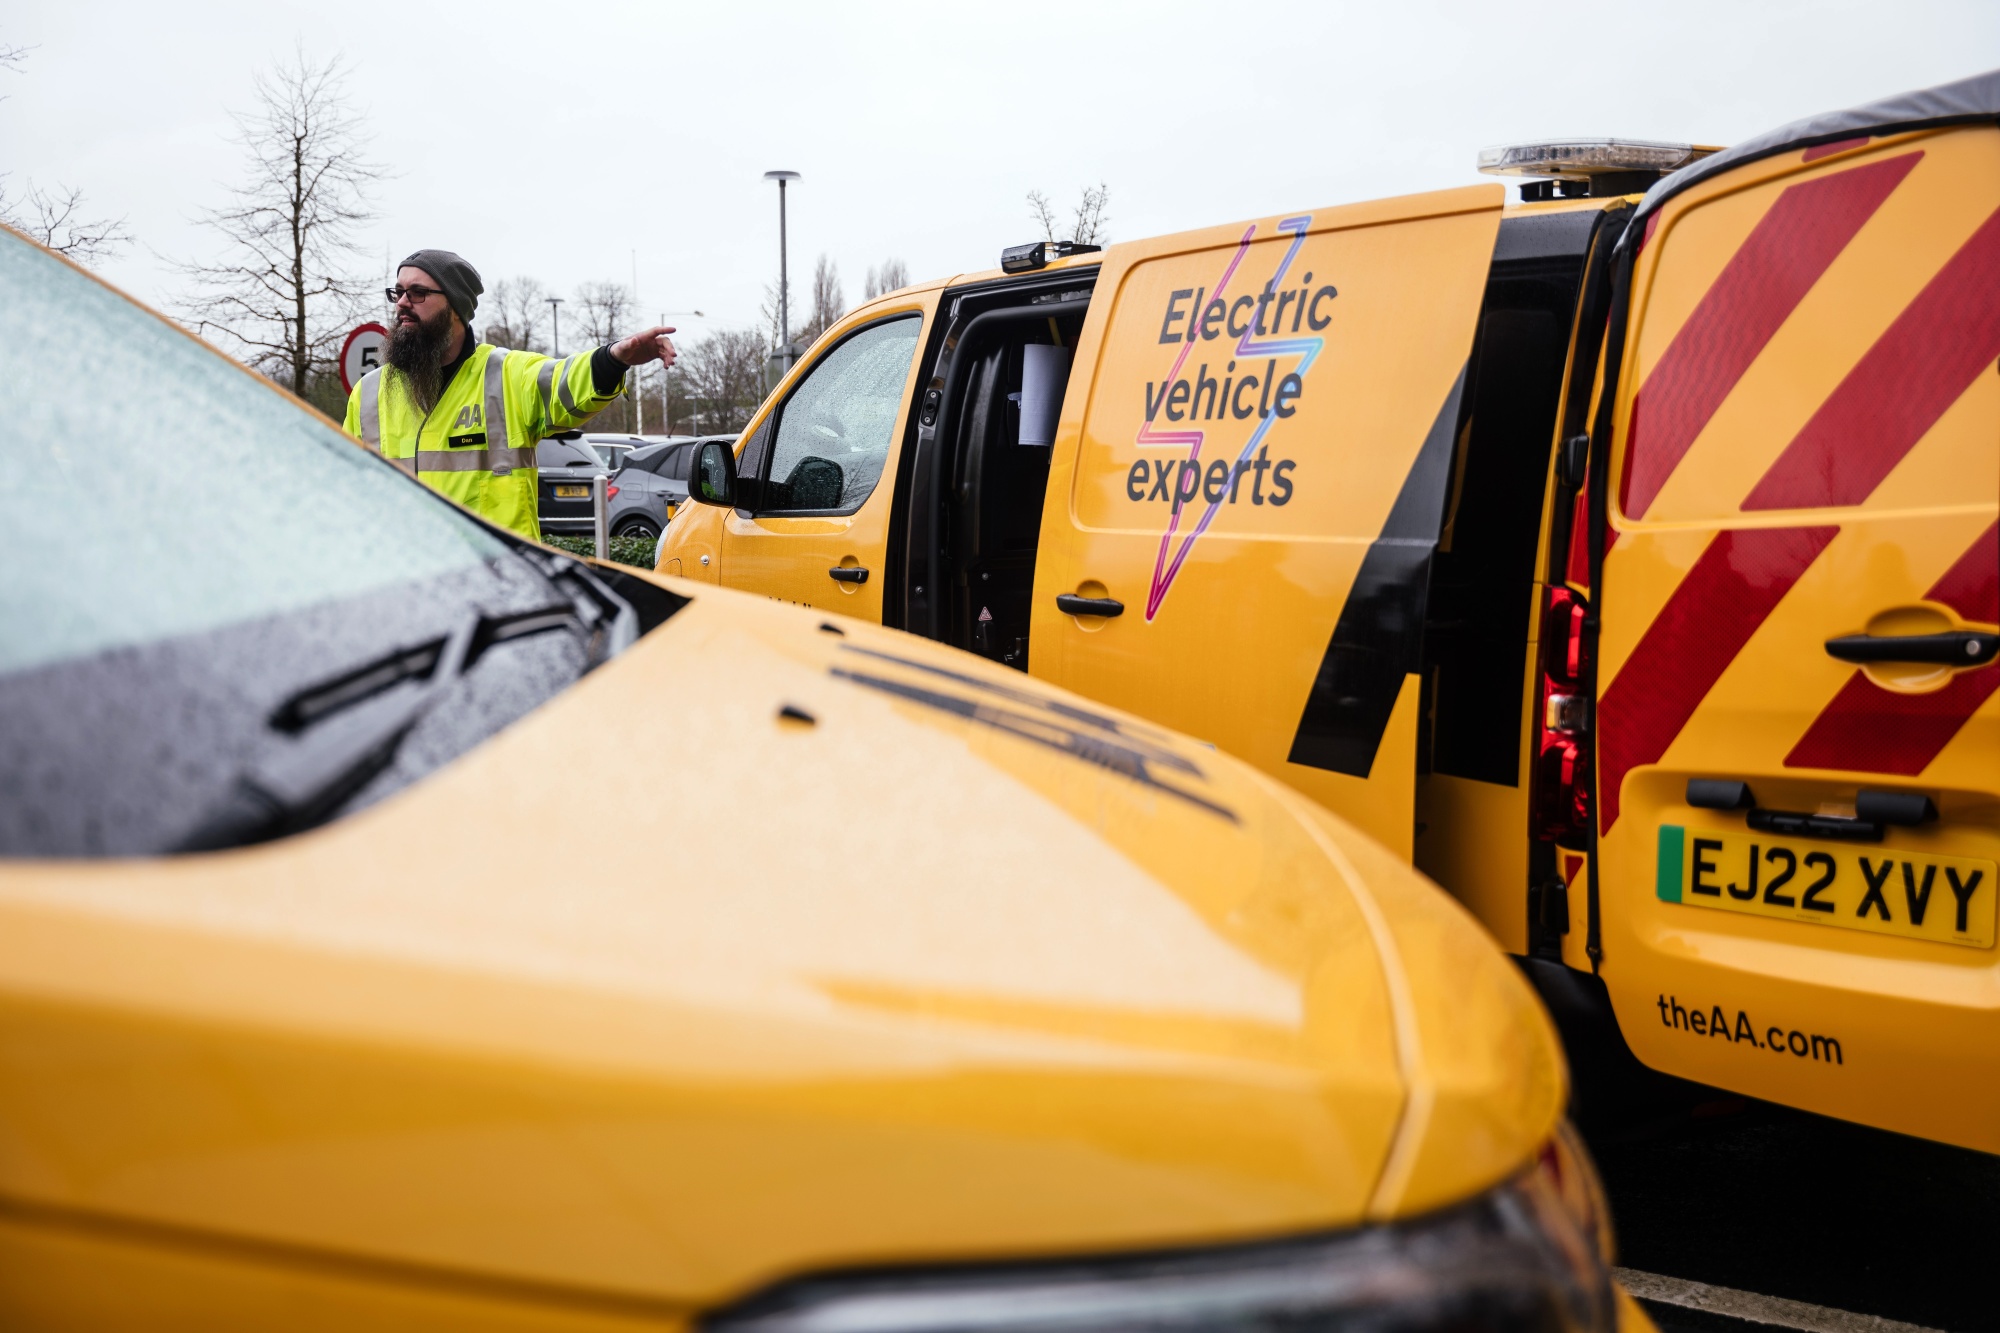 An AA patrol for electric vehicles in&nbsp;Birmingham, England.